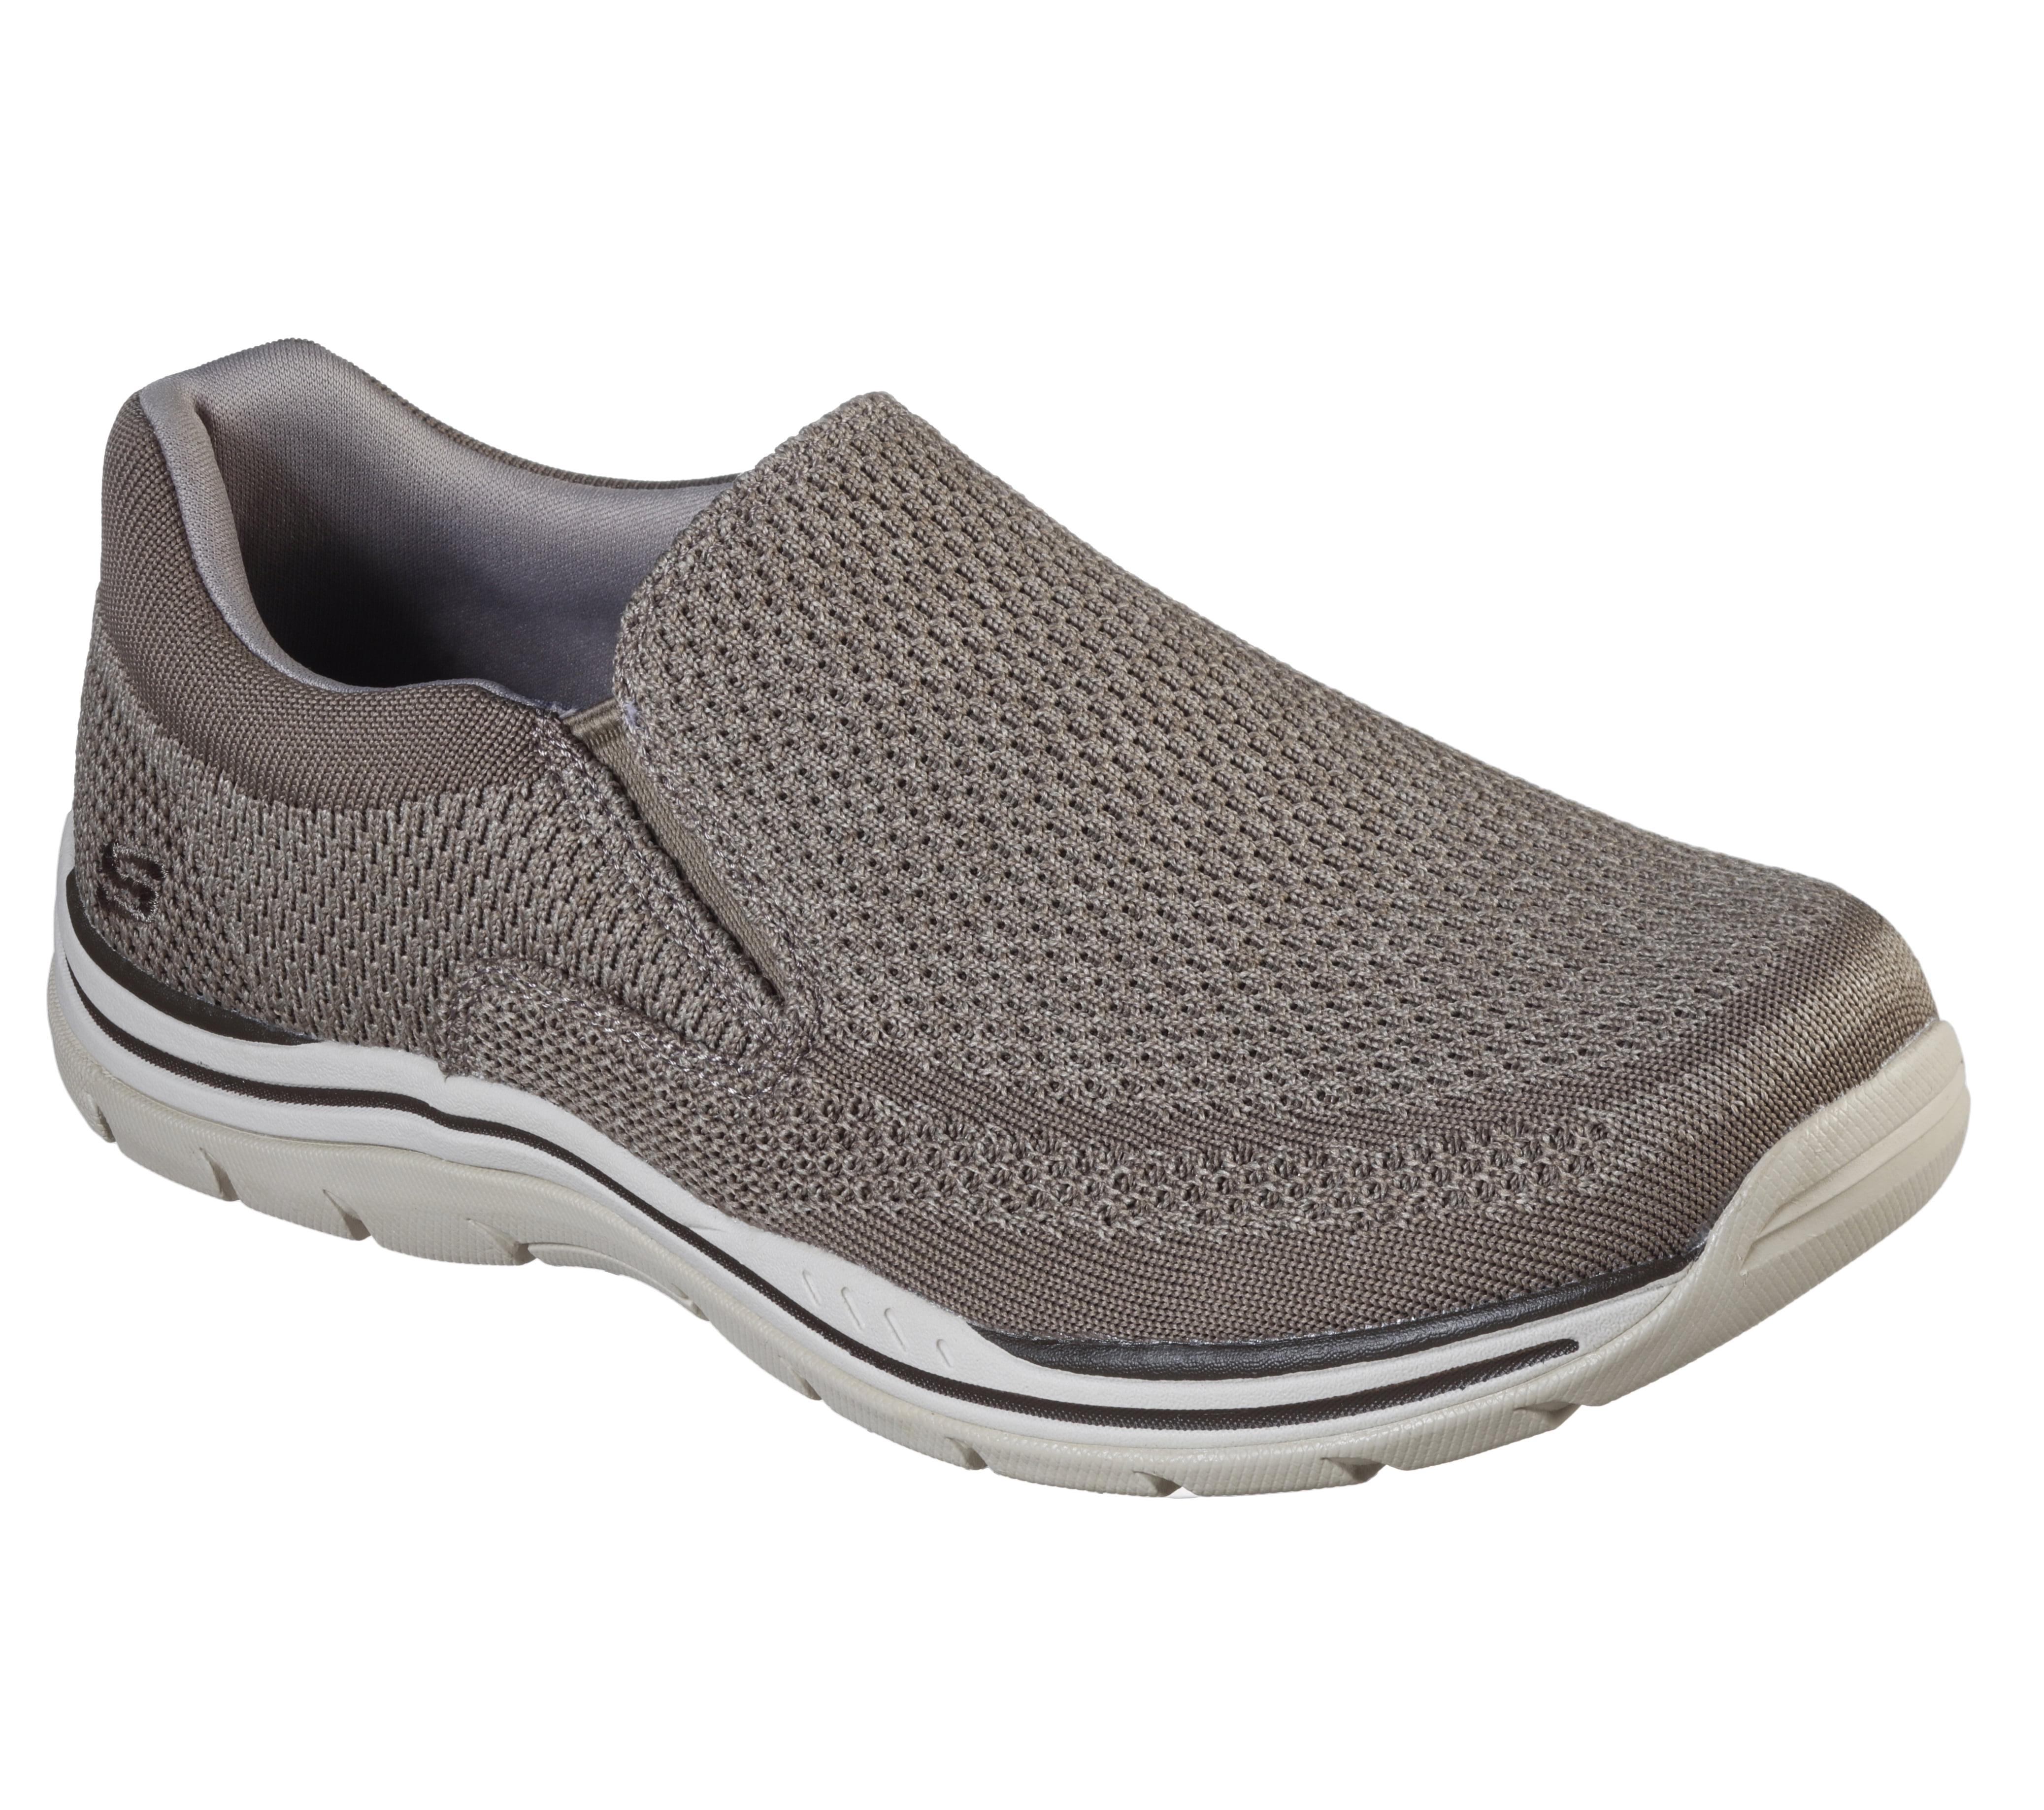 Skechers Men's Relaxed Expected Gomel Casual Slip-on (Wide Available) - Walmart.com